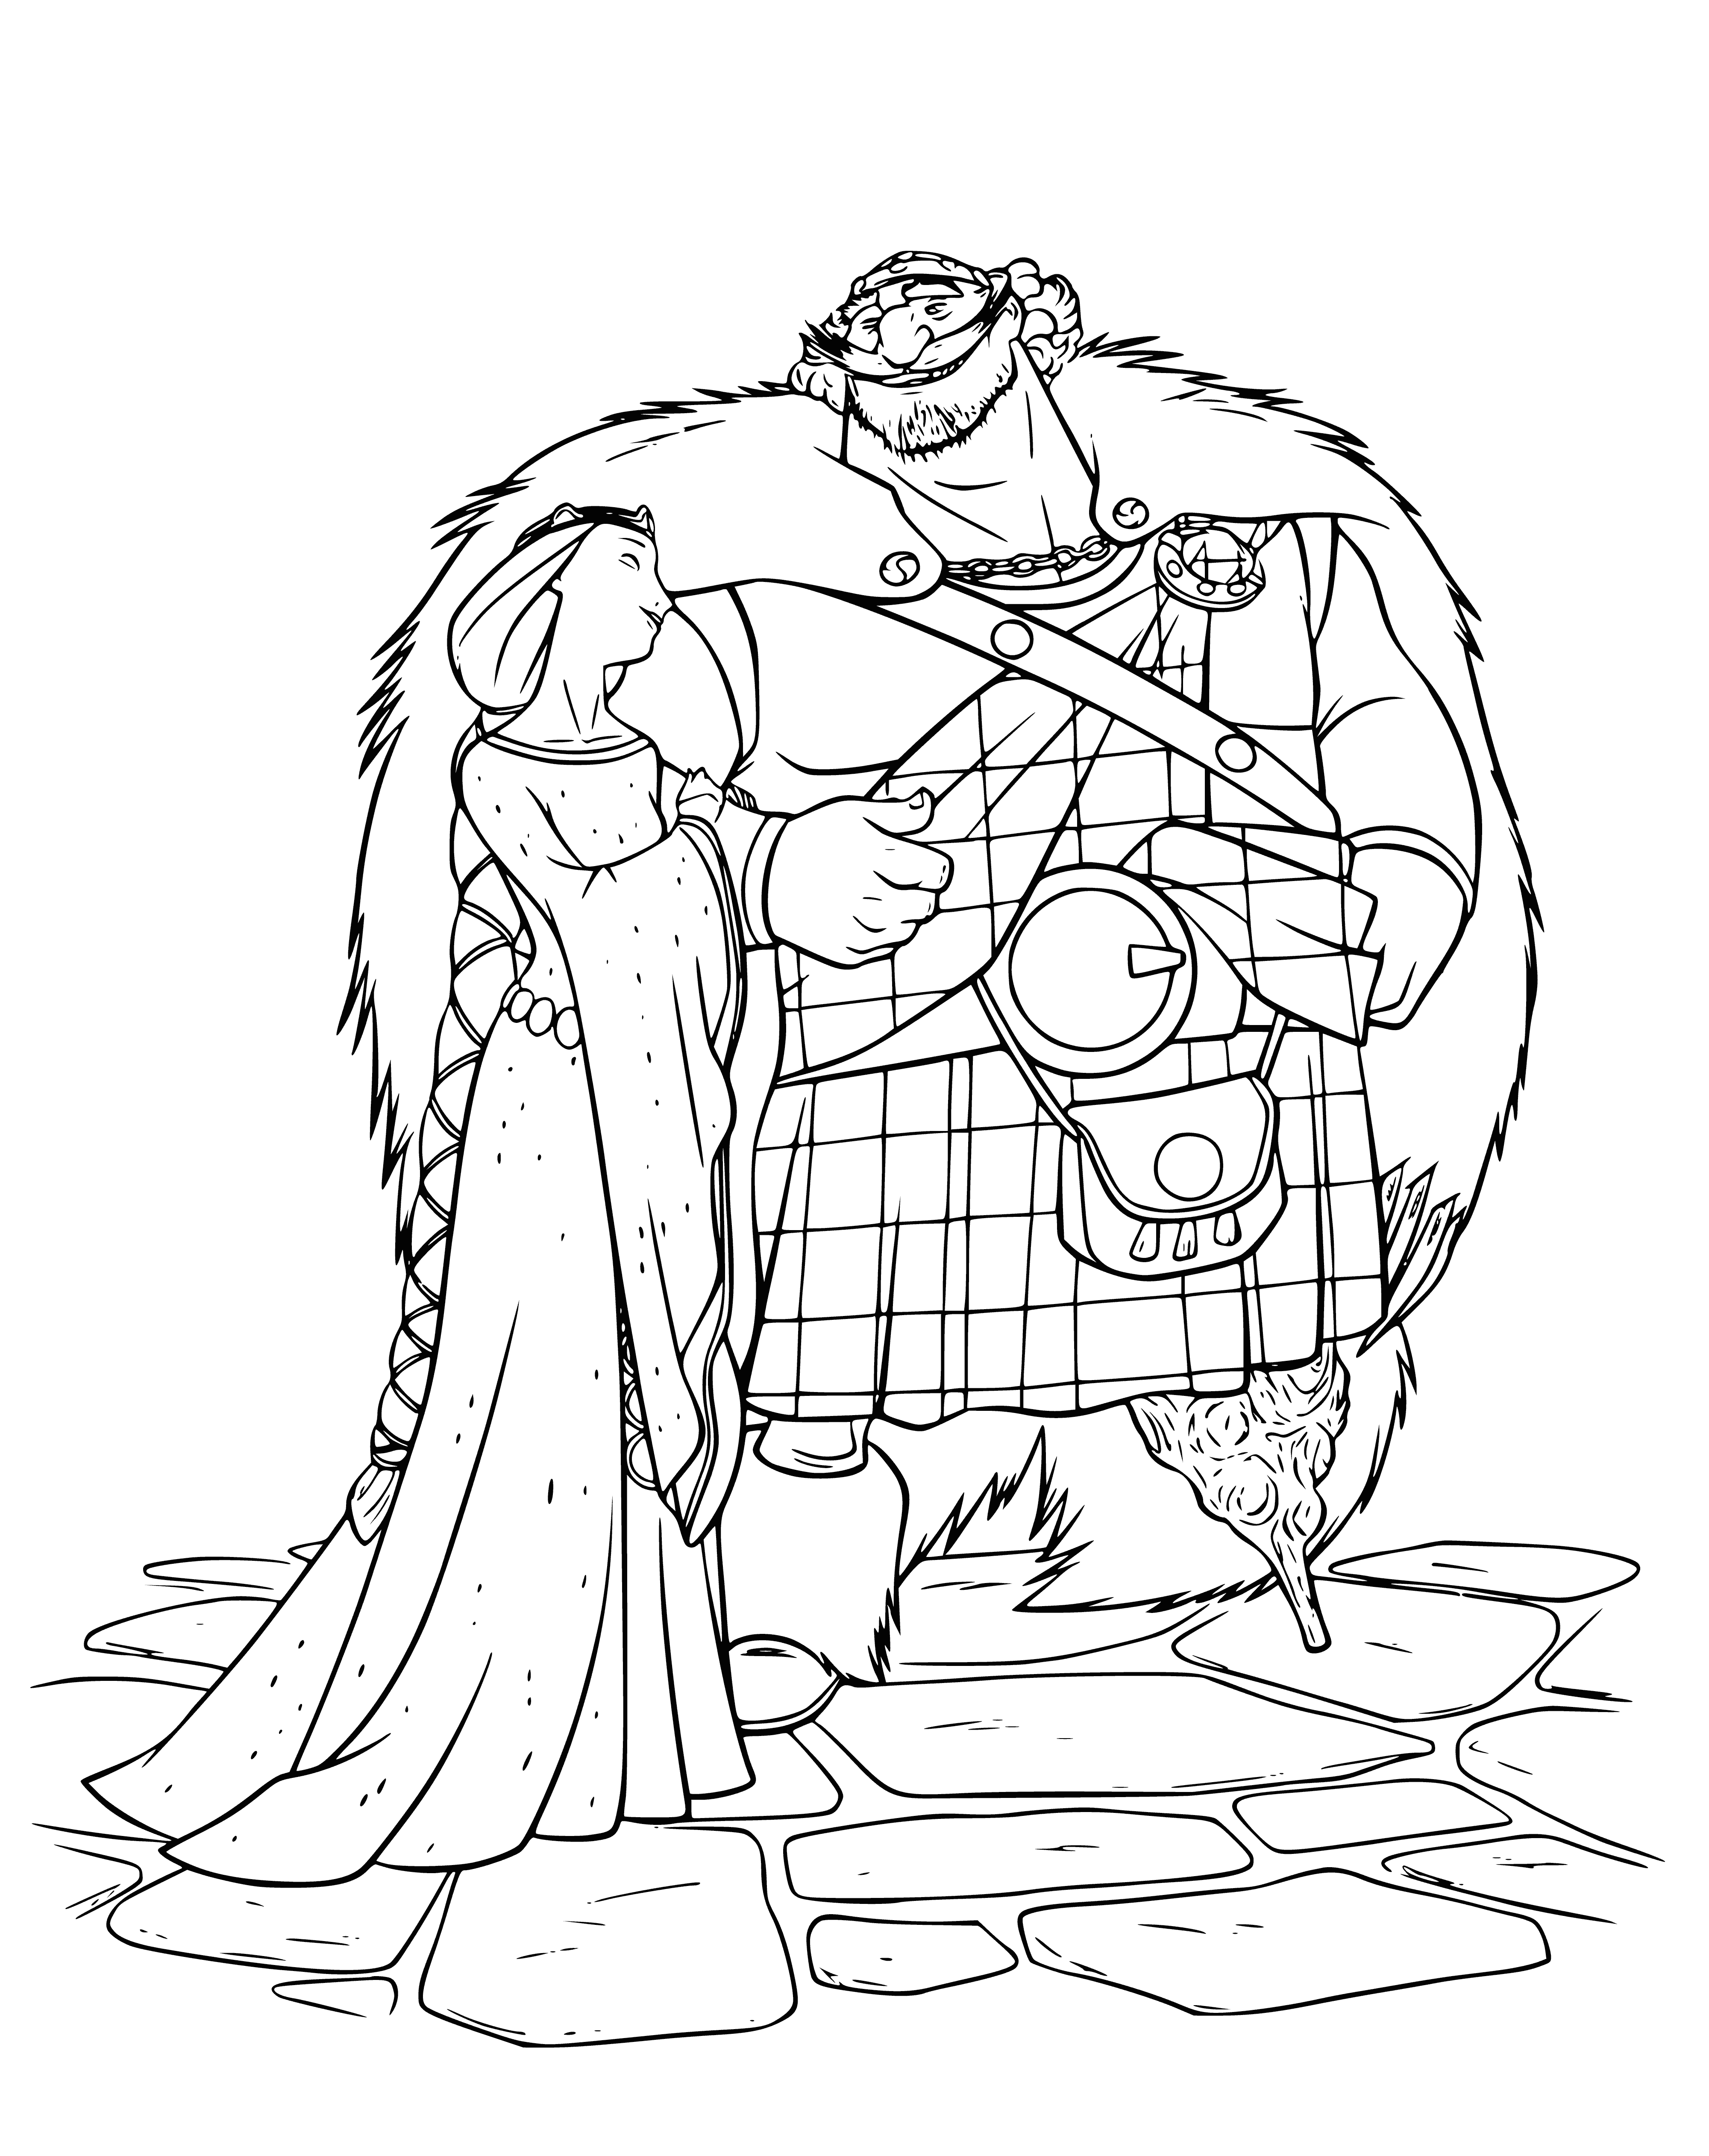 King and queen coloring page